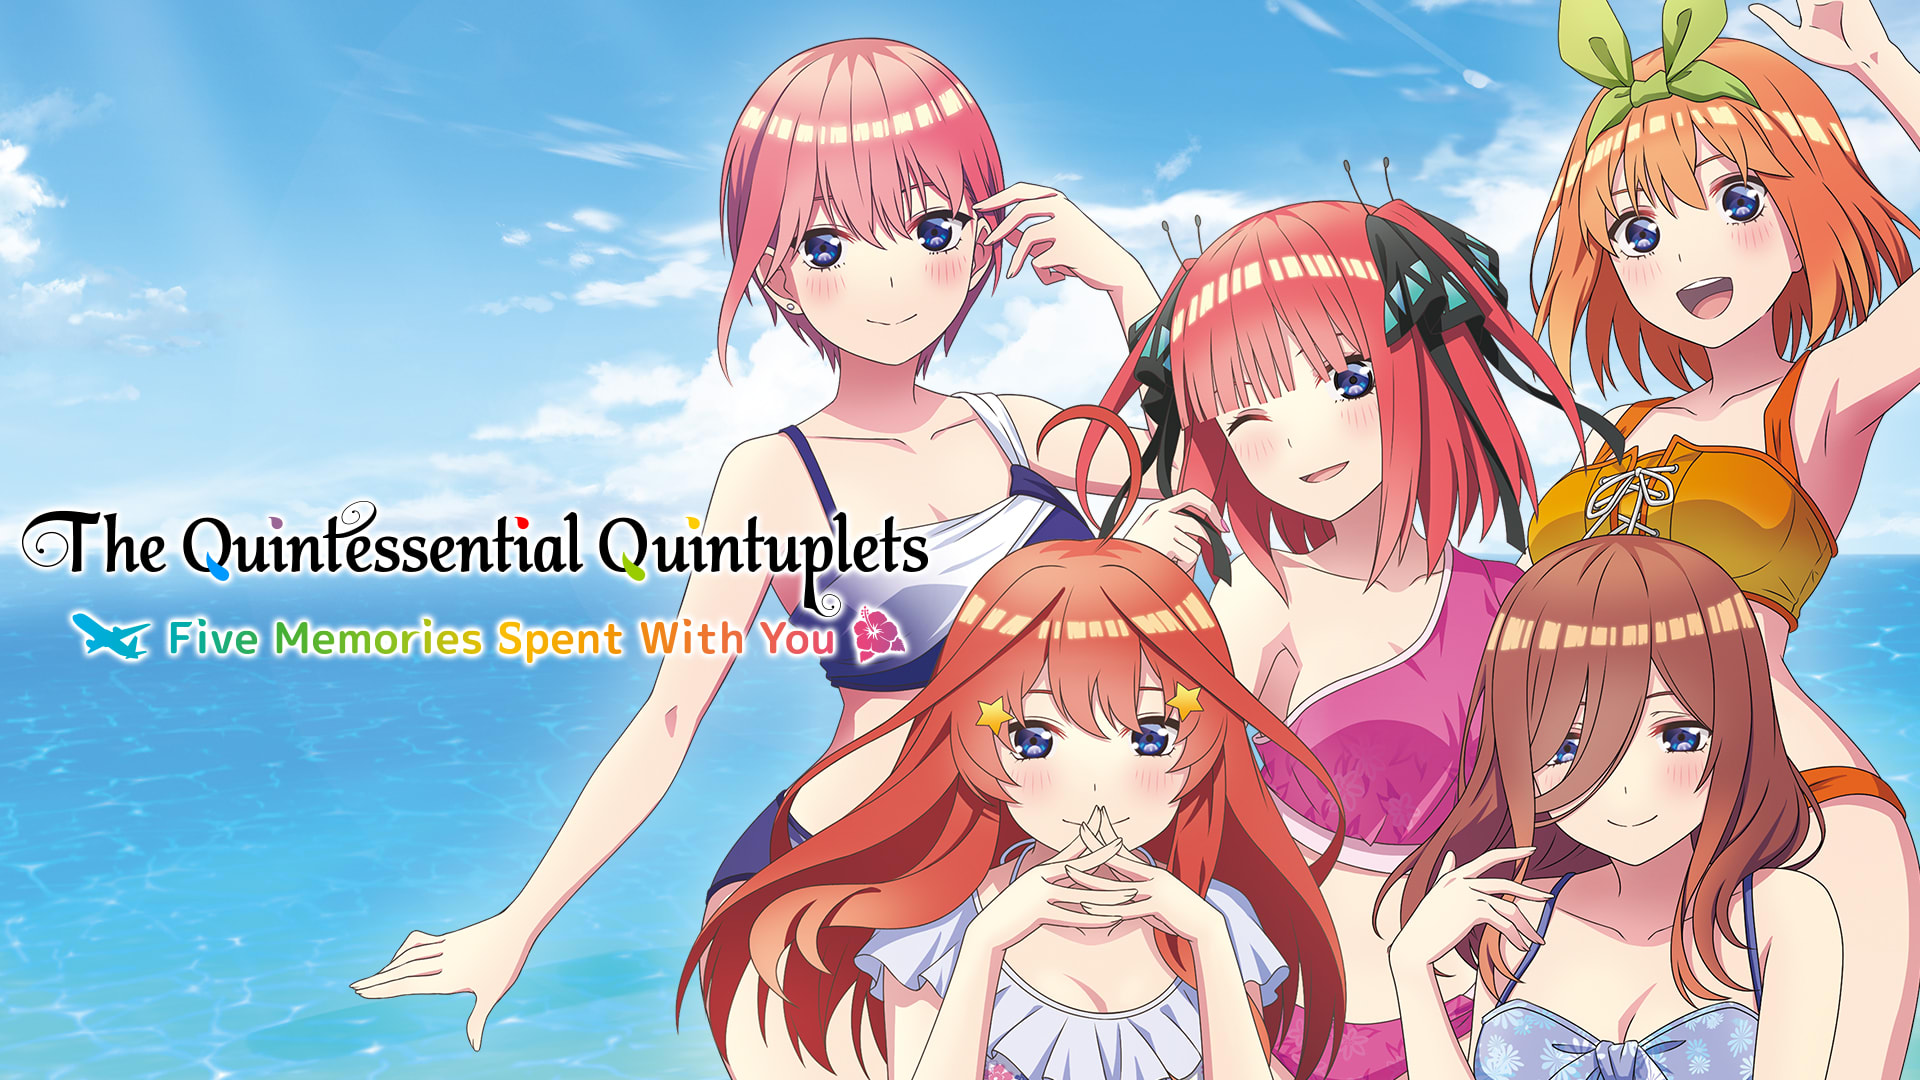 The Quintessential Quintuplets - Five Memories Spent With You 1